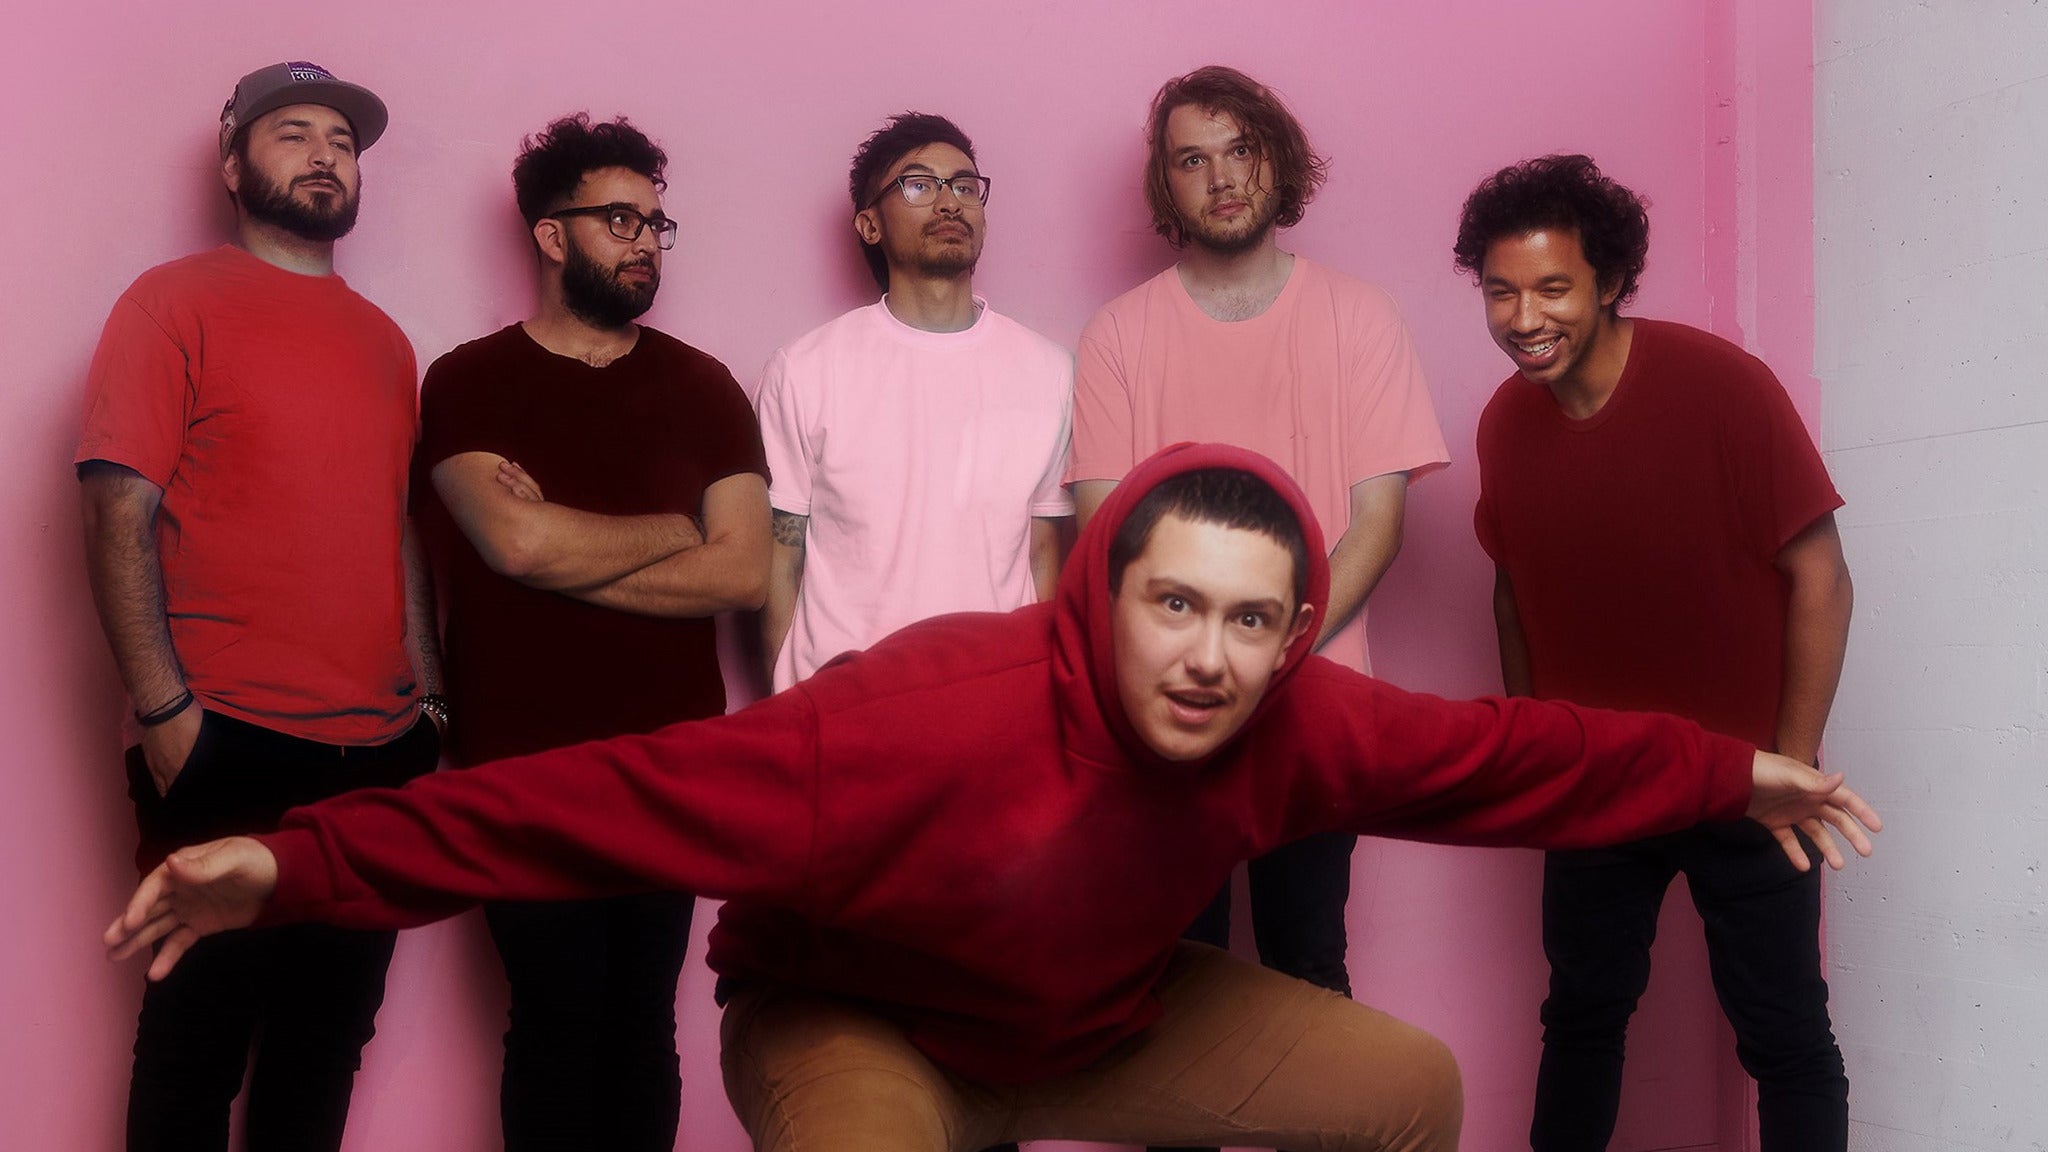 The Fall Tour of Hobo Johnson & the Lovemakers in Sacramento promo photo for Live Nation presale offer code